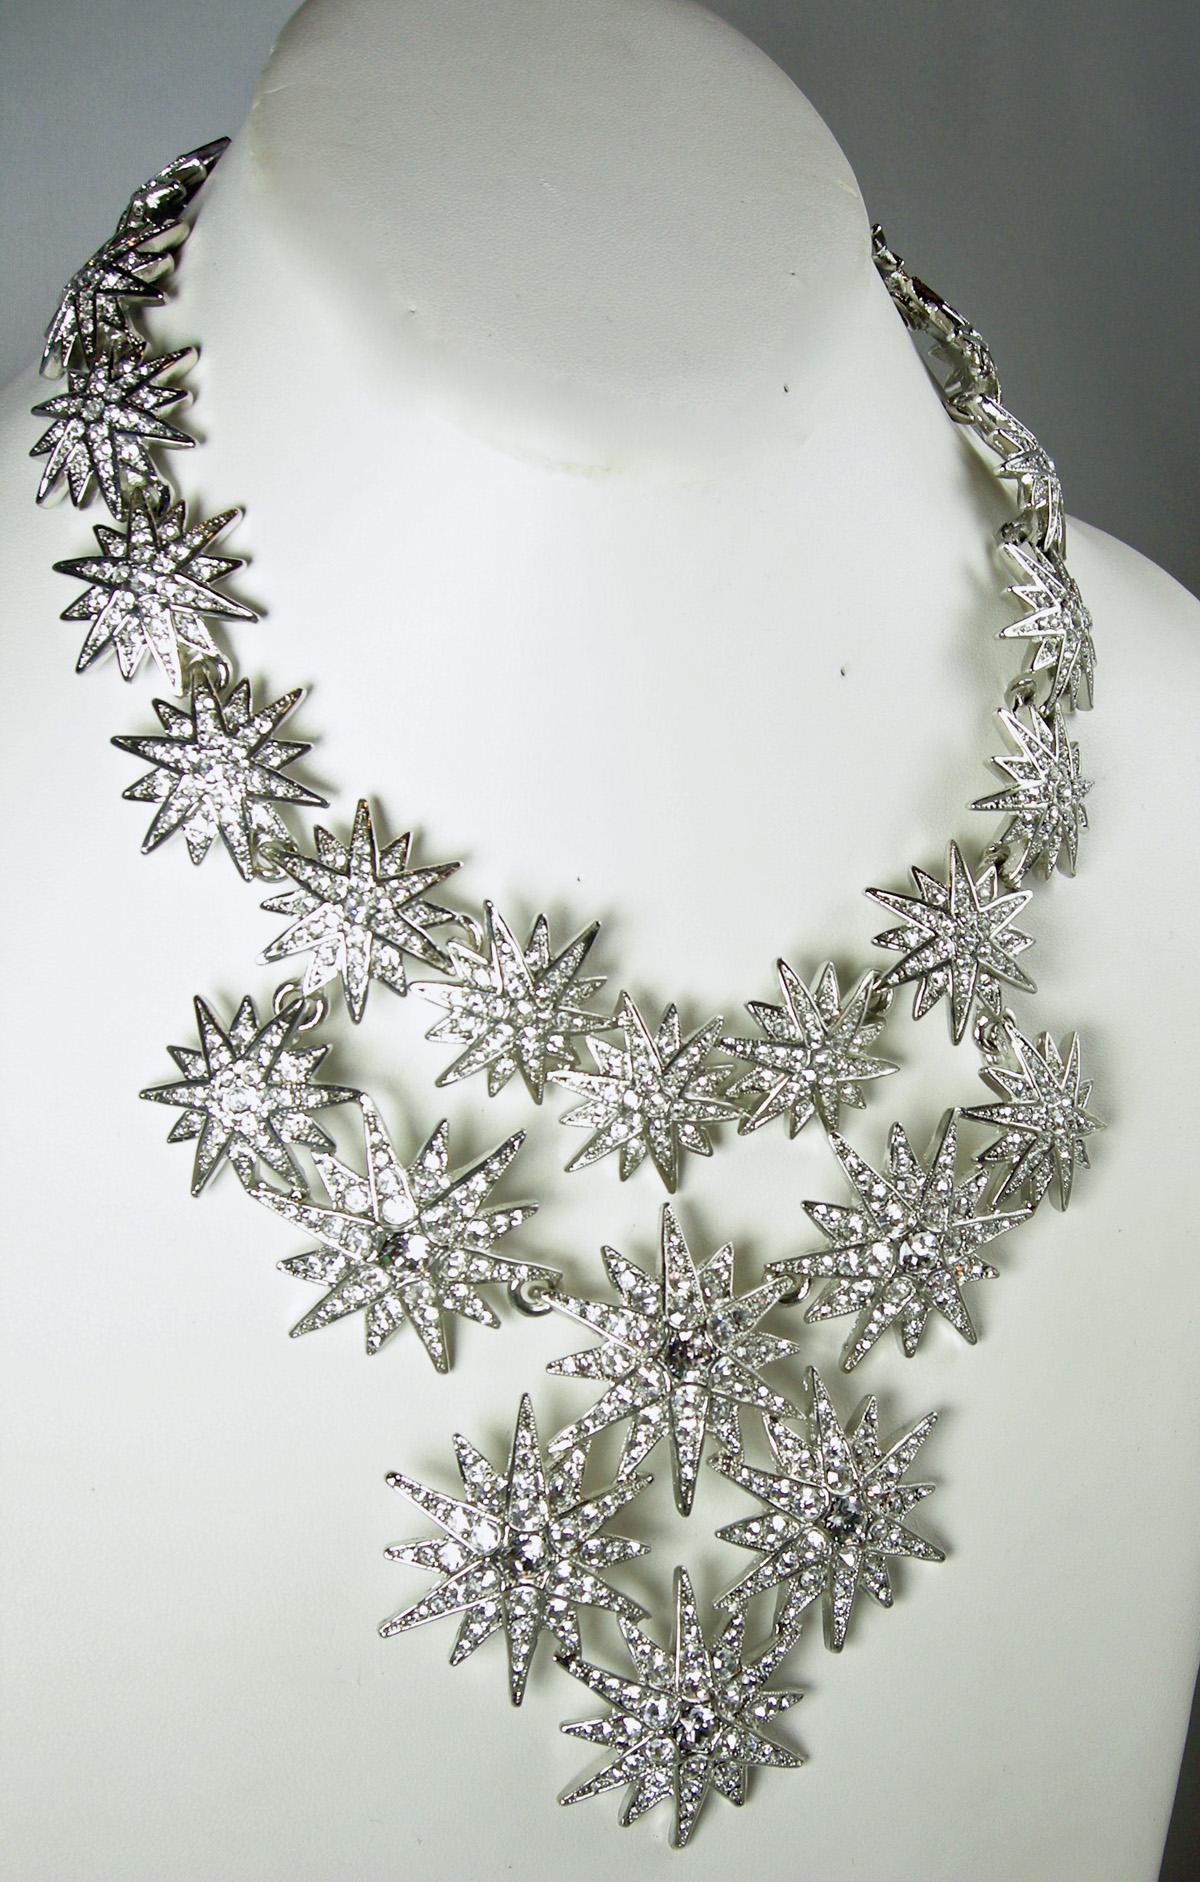 This is Kenneth Jay Lane’s crystal stars bib necklace is encrusted with layers of 3-dimensional starts forming a bib design.  It is in a silver tone setting and has a hook clasp.  It measures 18” long x 4” at the centerpiece.  It is signed “Kenneth